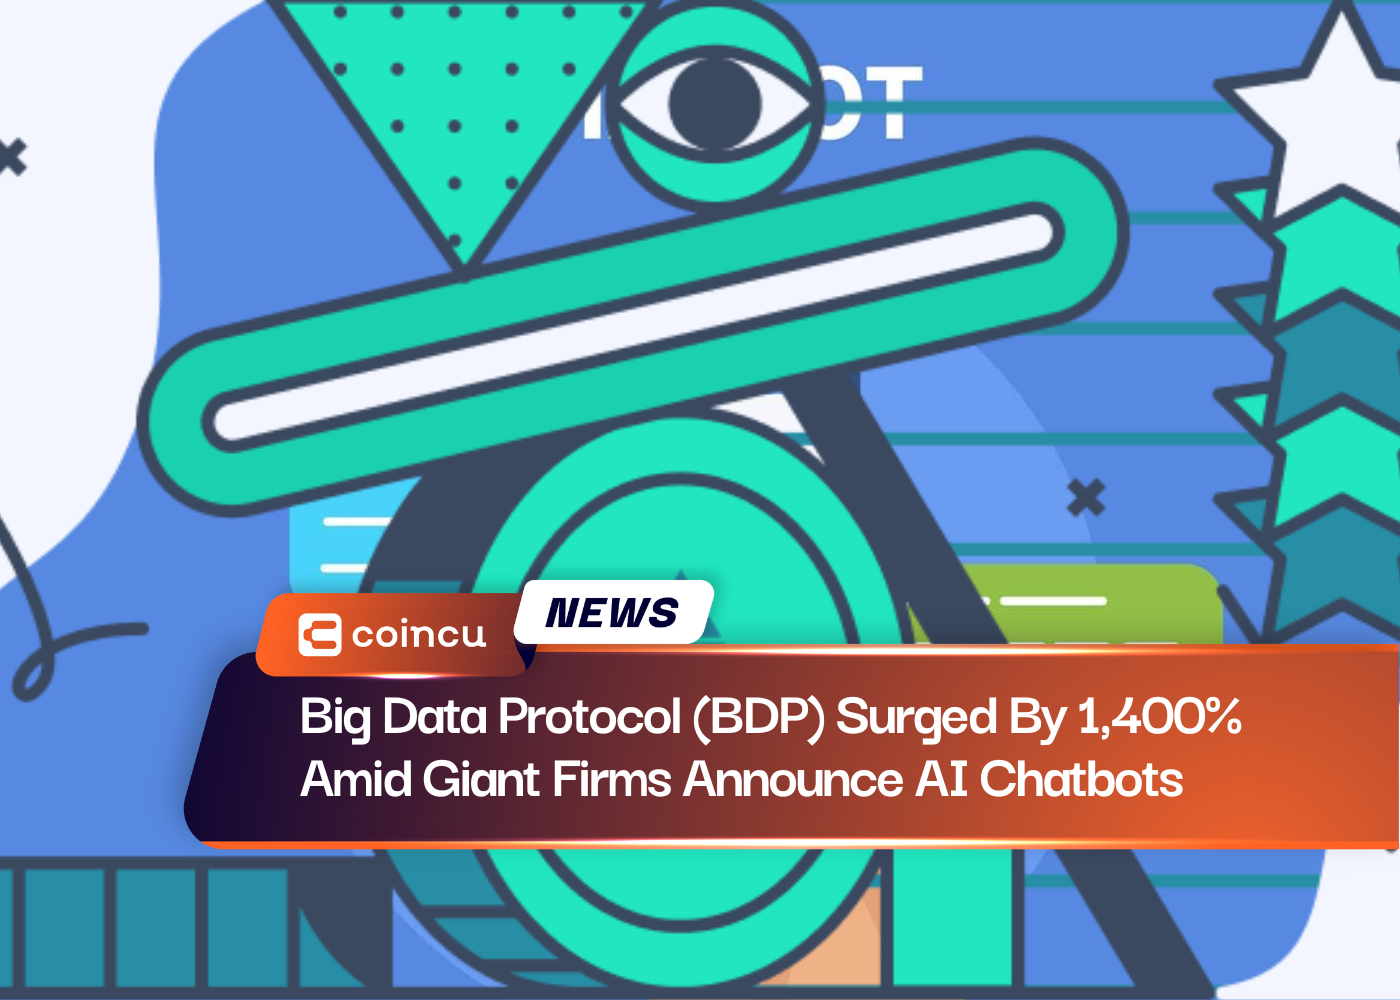 Big Data Protocol (BDP) Surged By 1,400% Amid Giant Firms Announce AI Chatbots